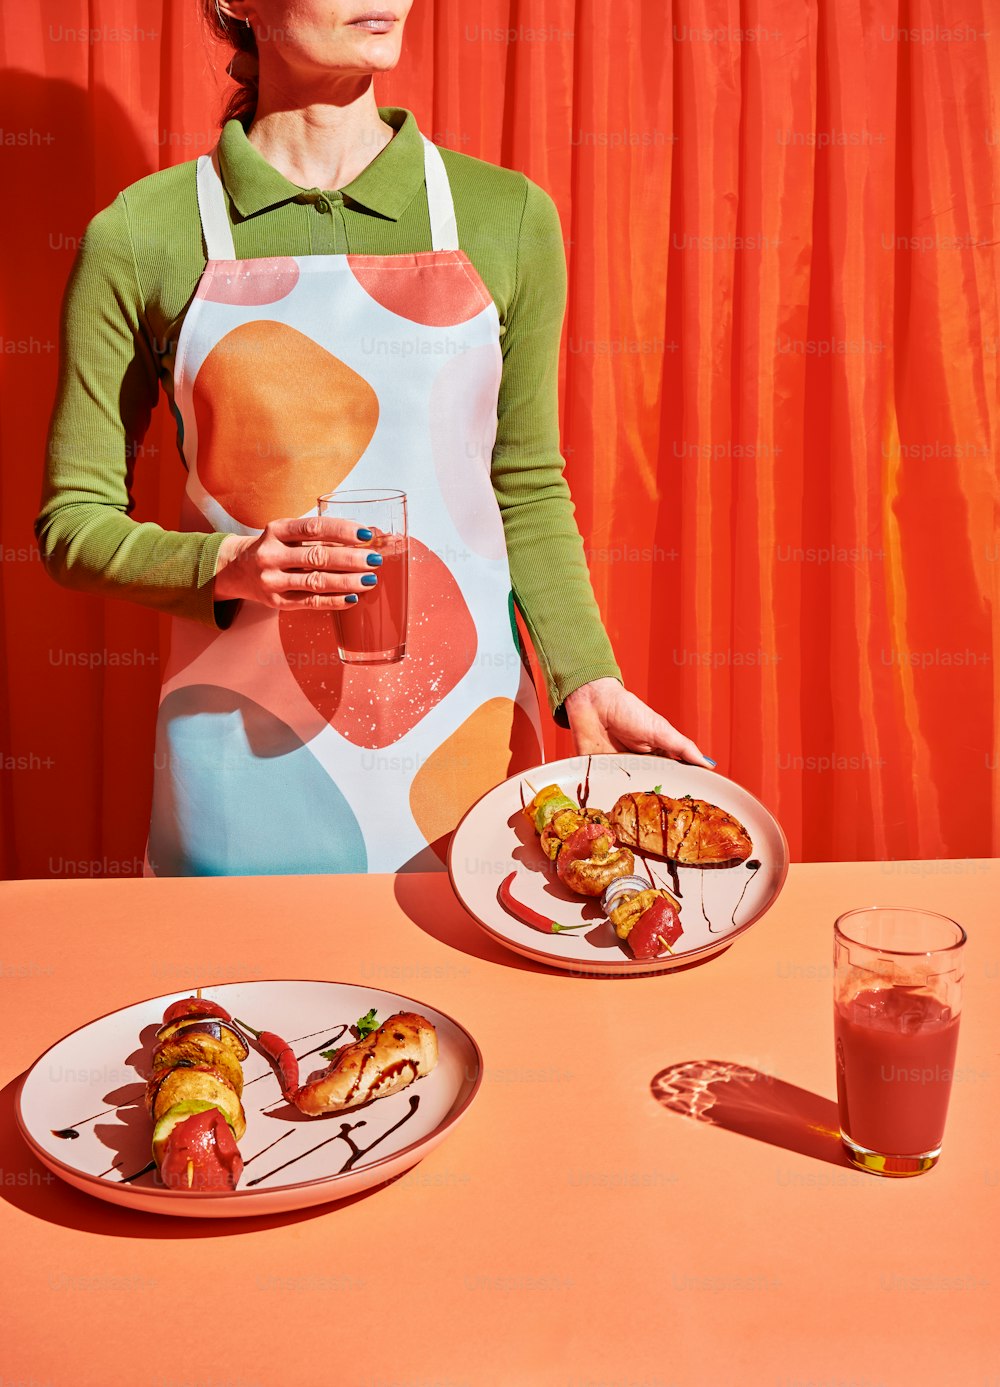 a woman in an apron holding a plate of food